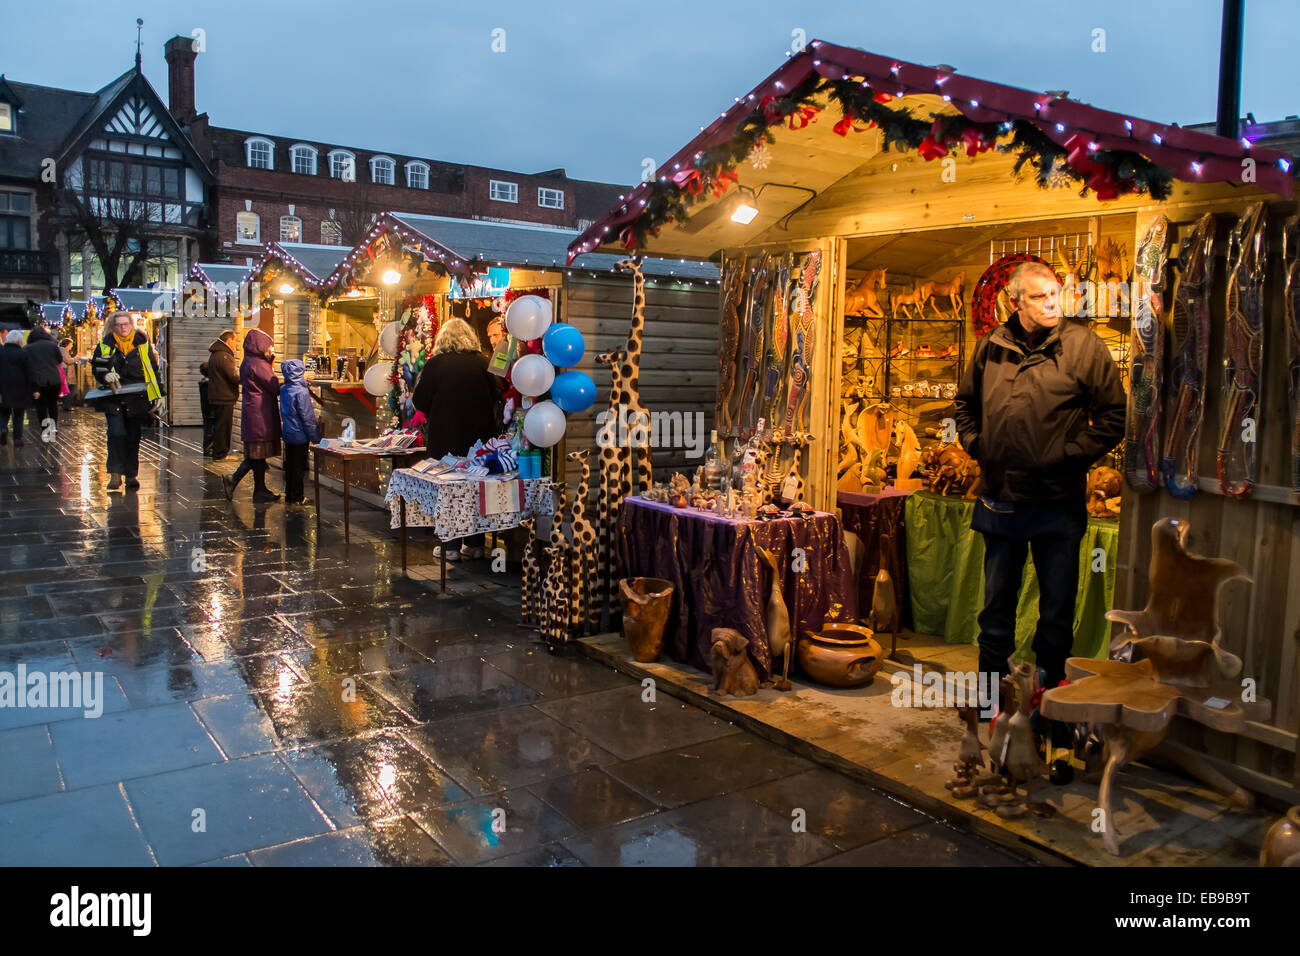 Salisbury 27th November 2014 Salisbury Christmas Market Openning night crowds gathered despite the weather Chalets selling Christmas goods and entertainment by local choirs . Rated by the Daily Telegraph in 2013 as one of the ‘Top 5 Christmas Markets in the UK. Credit:  Paul Chambers/Alamy Live News Stock Photo